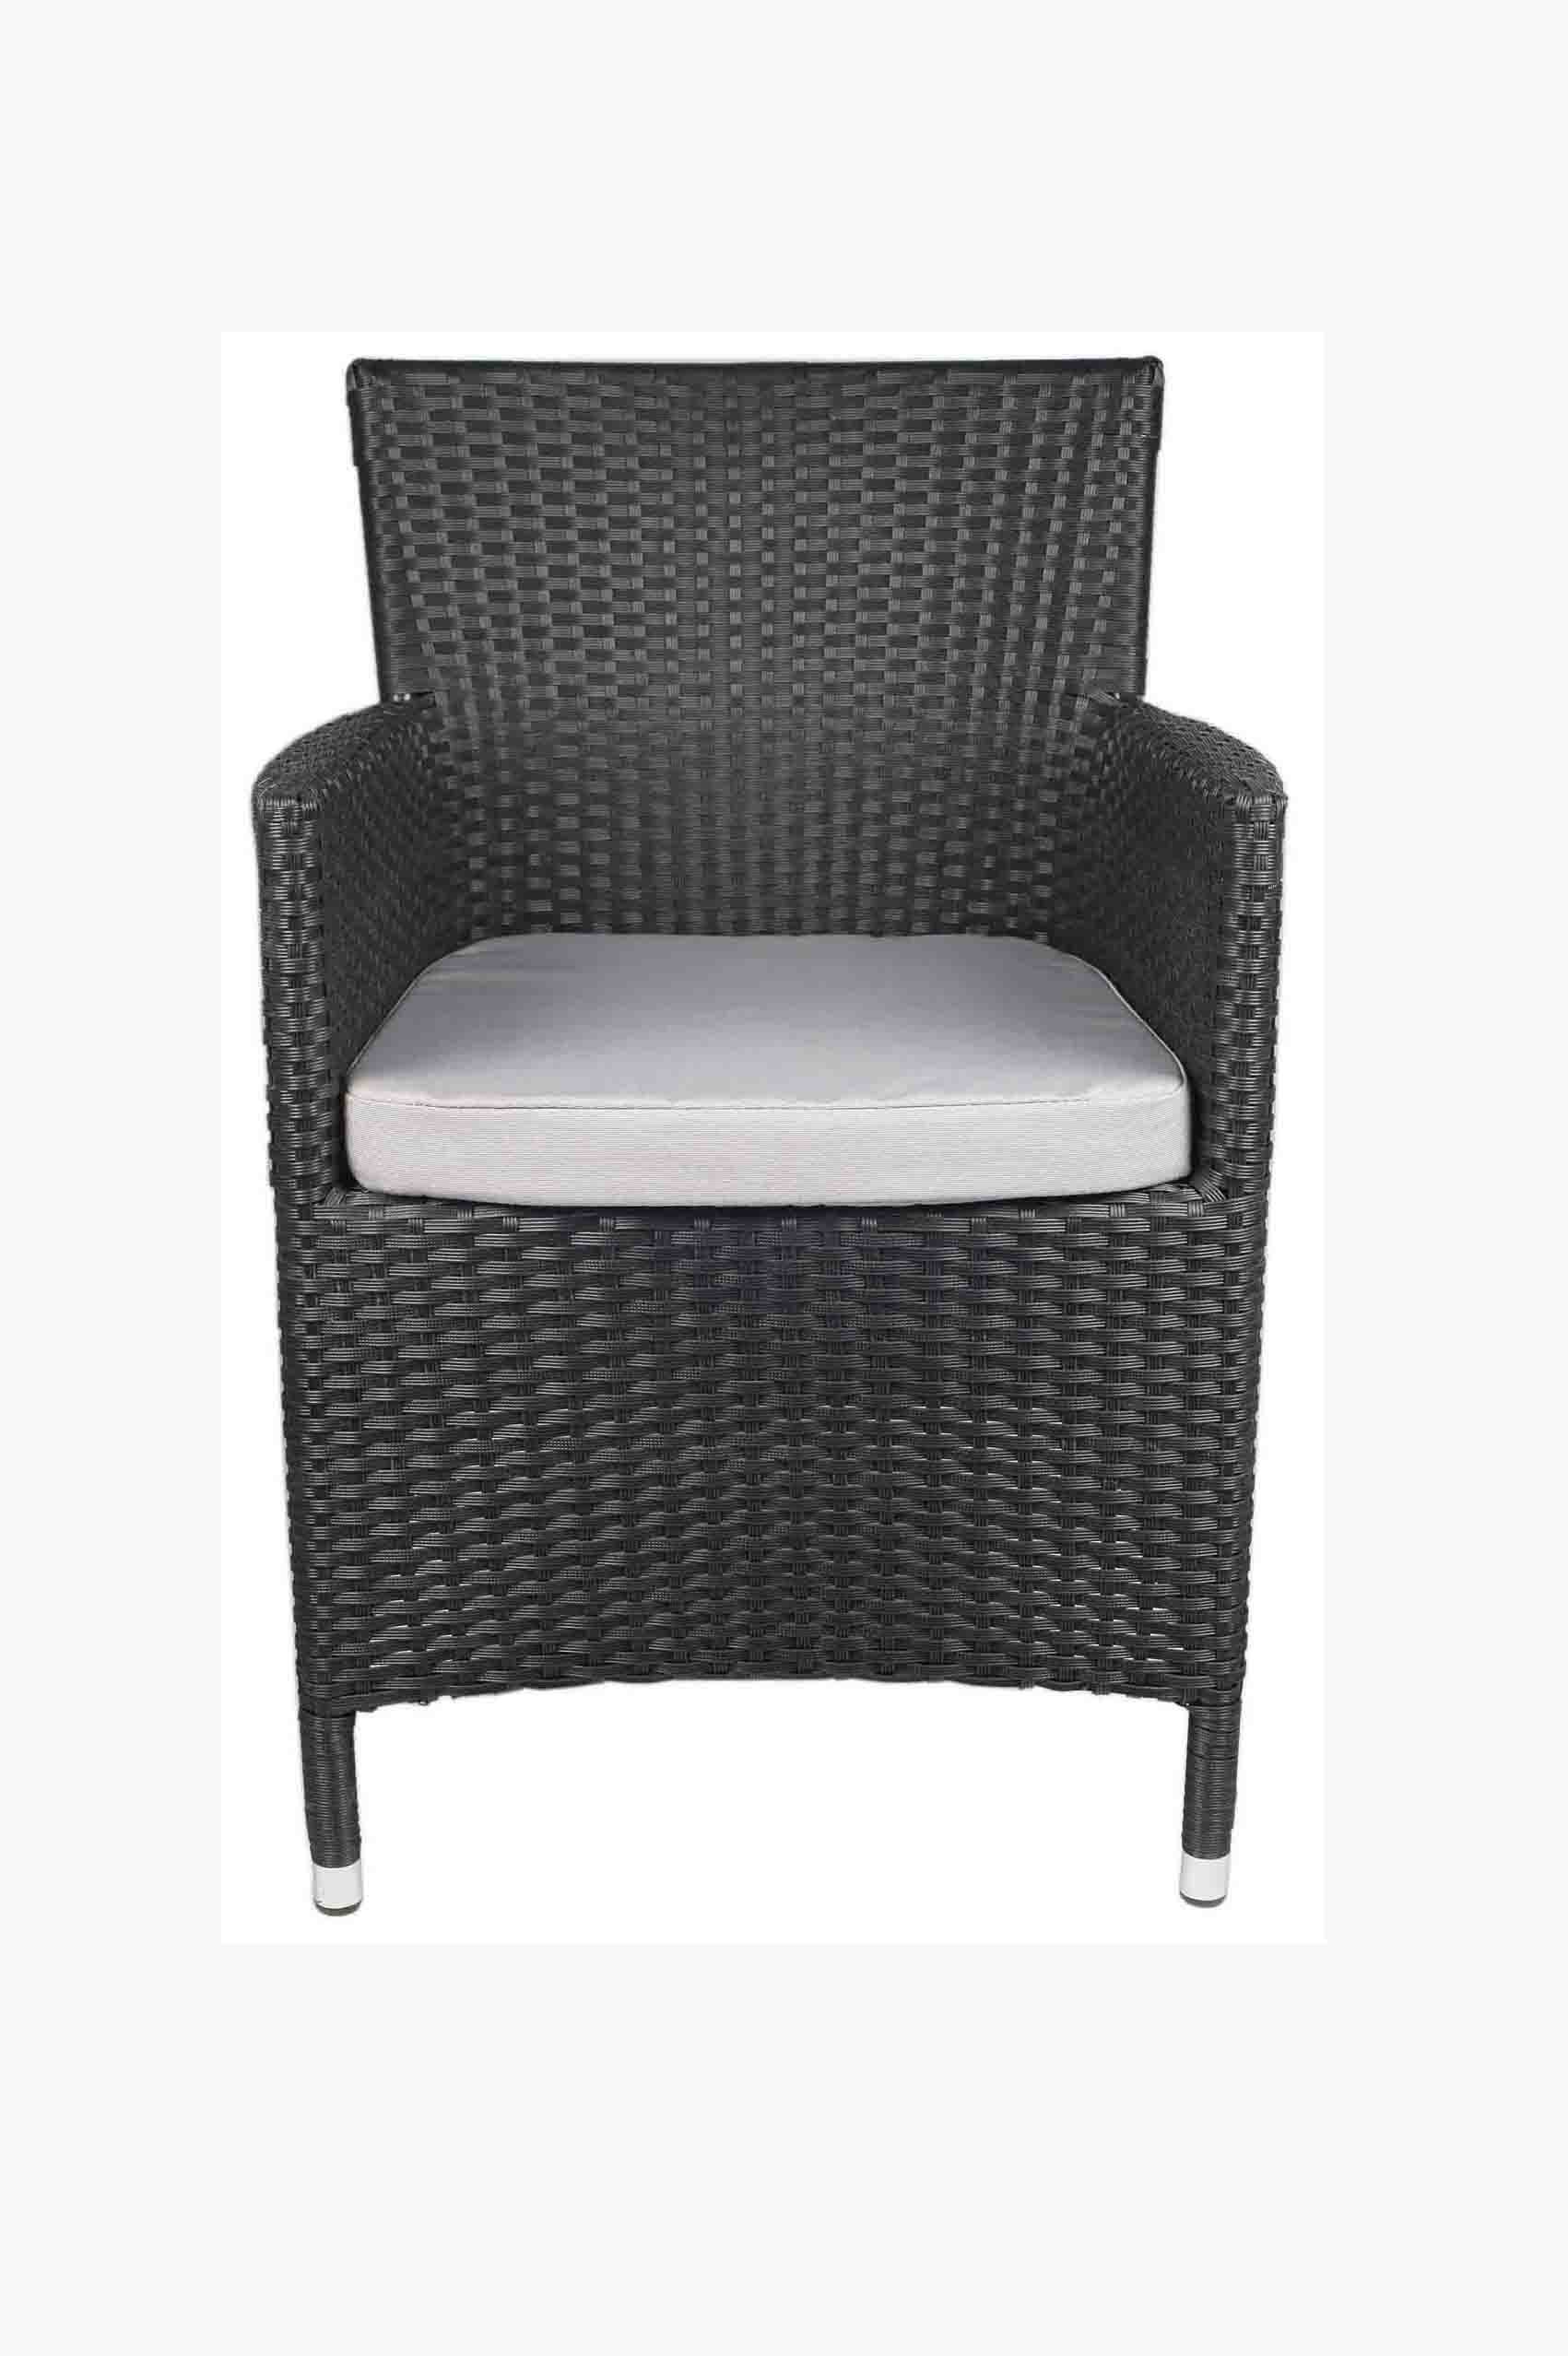 Outdoor Rattan Chair - Buy Outdoor Rattan Chair Online at Best Prices